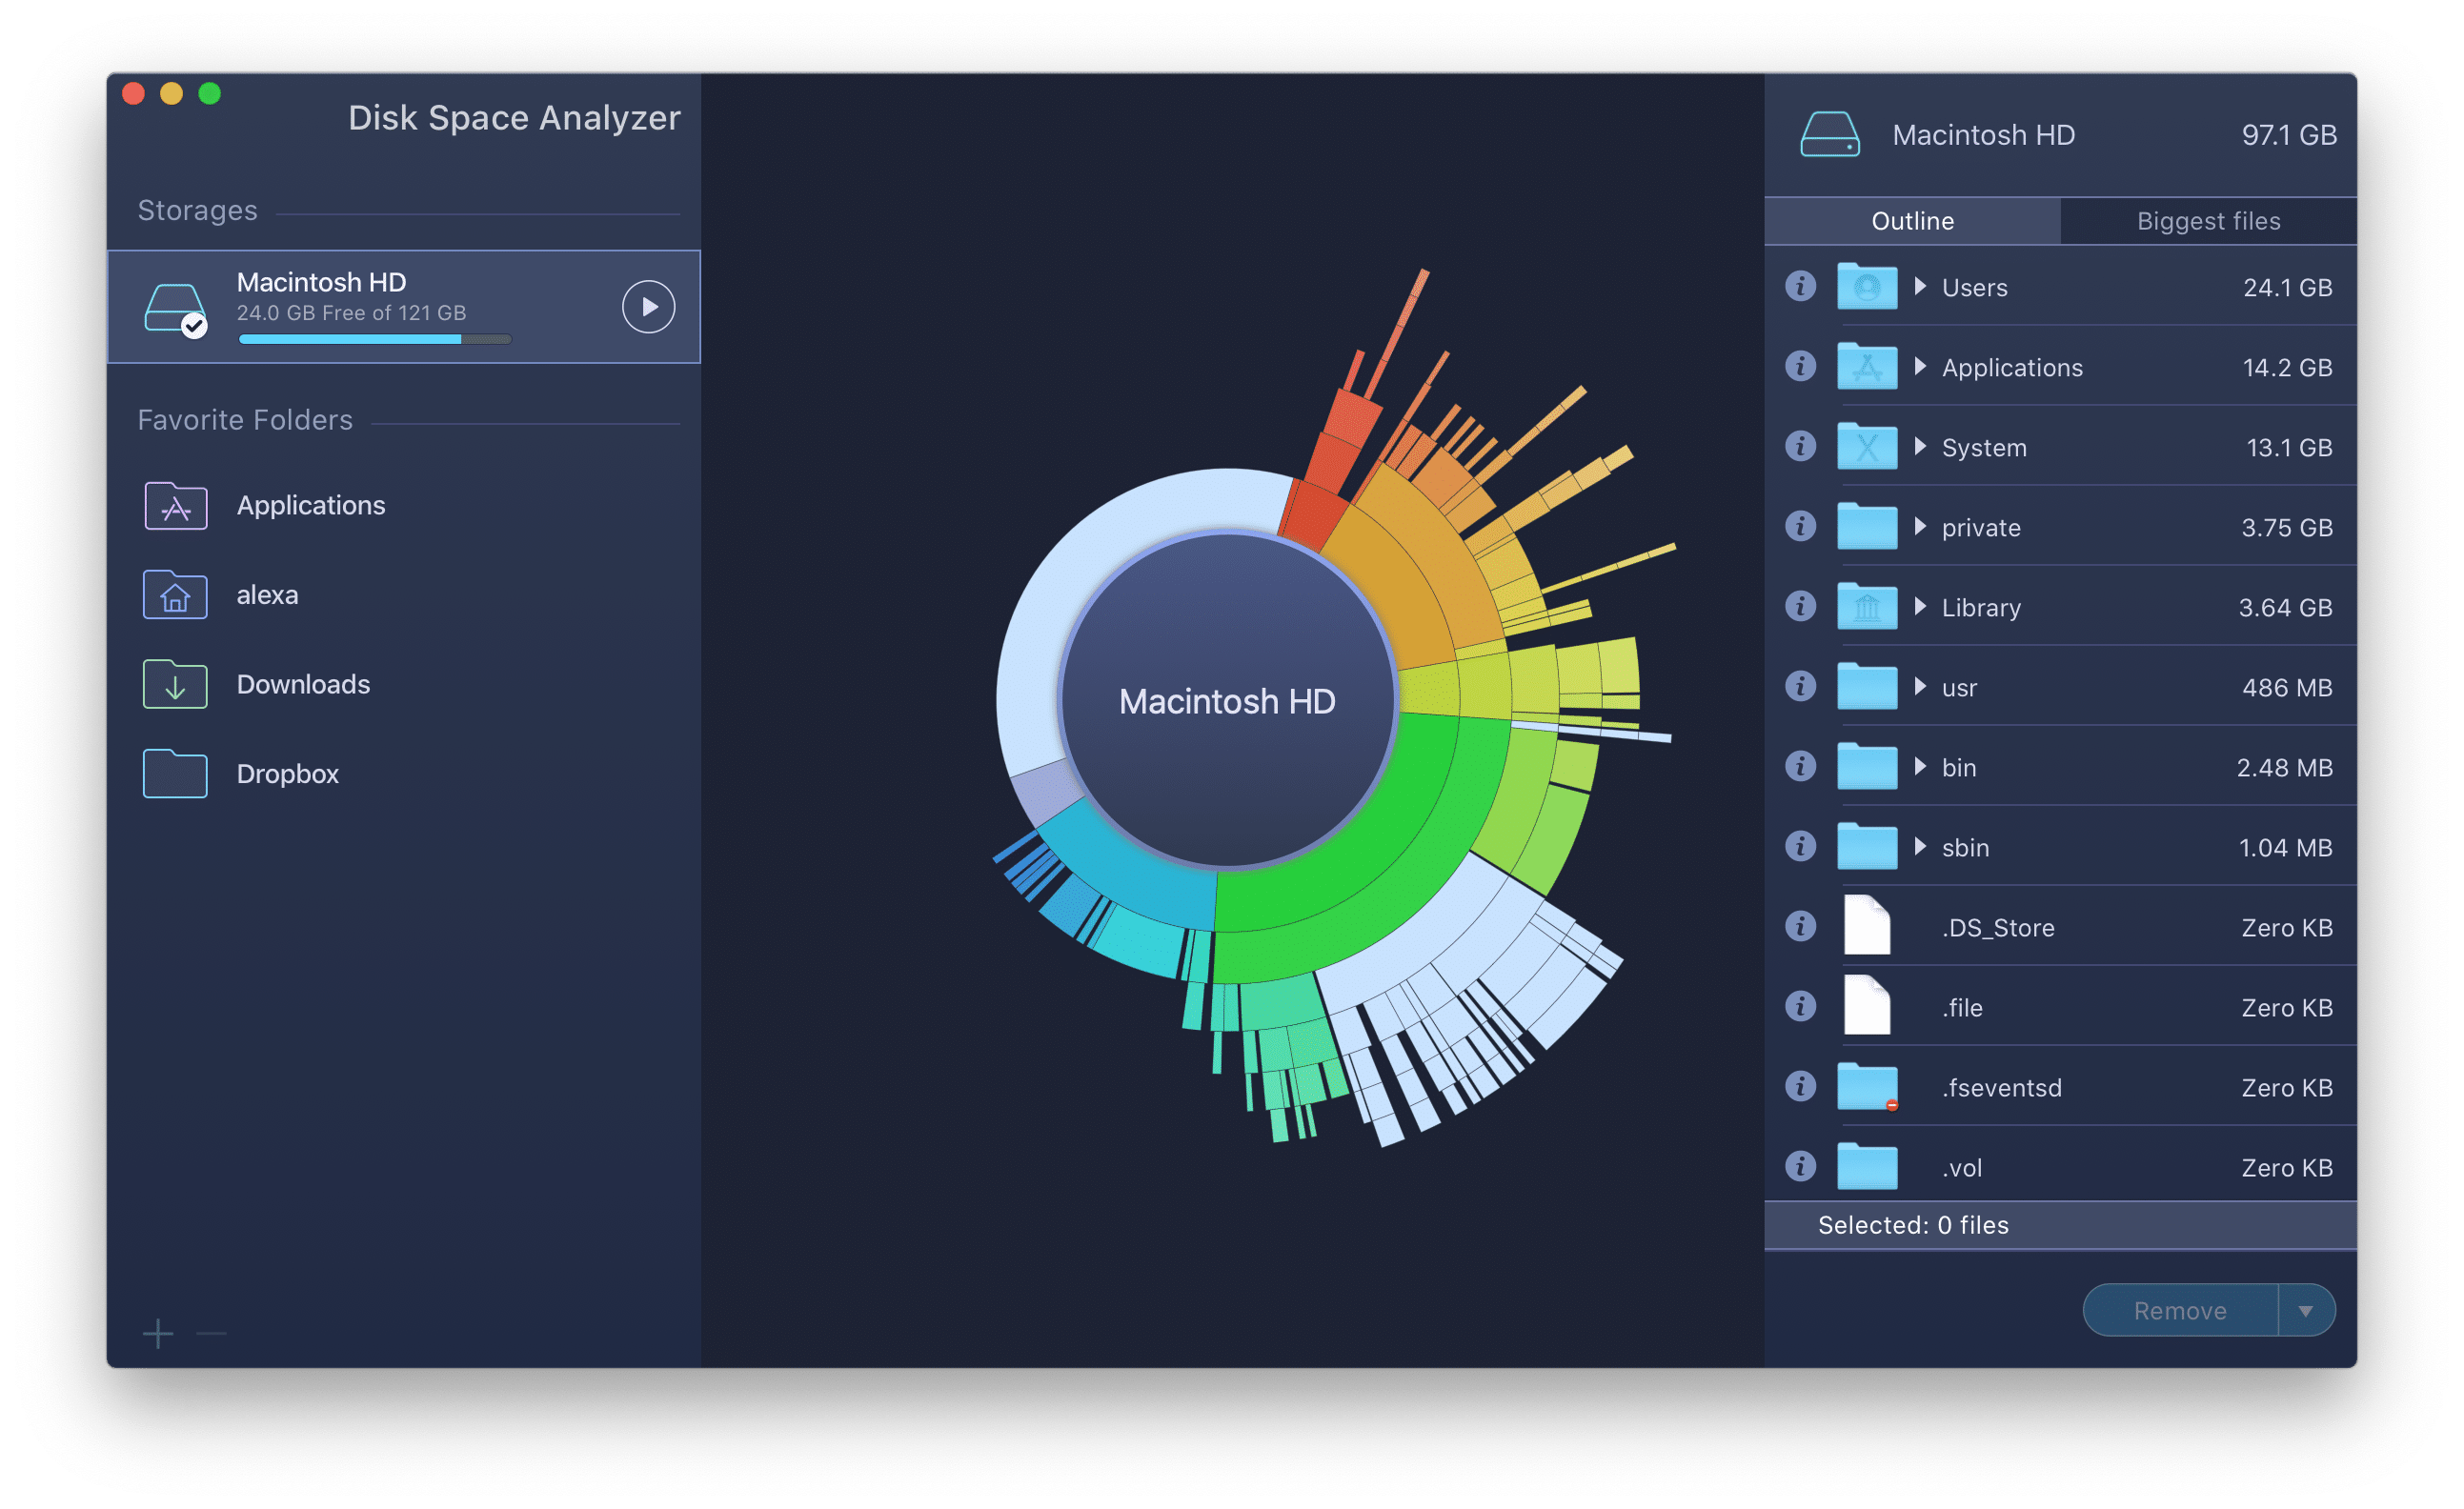 Disk Space Analyzer app for checking Mac disk usage